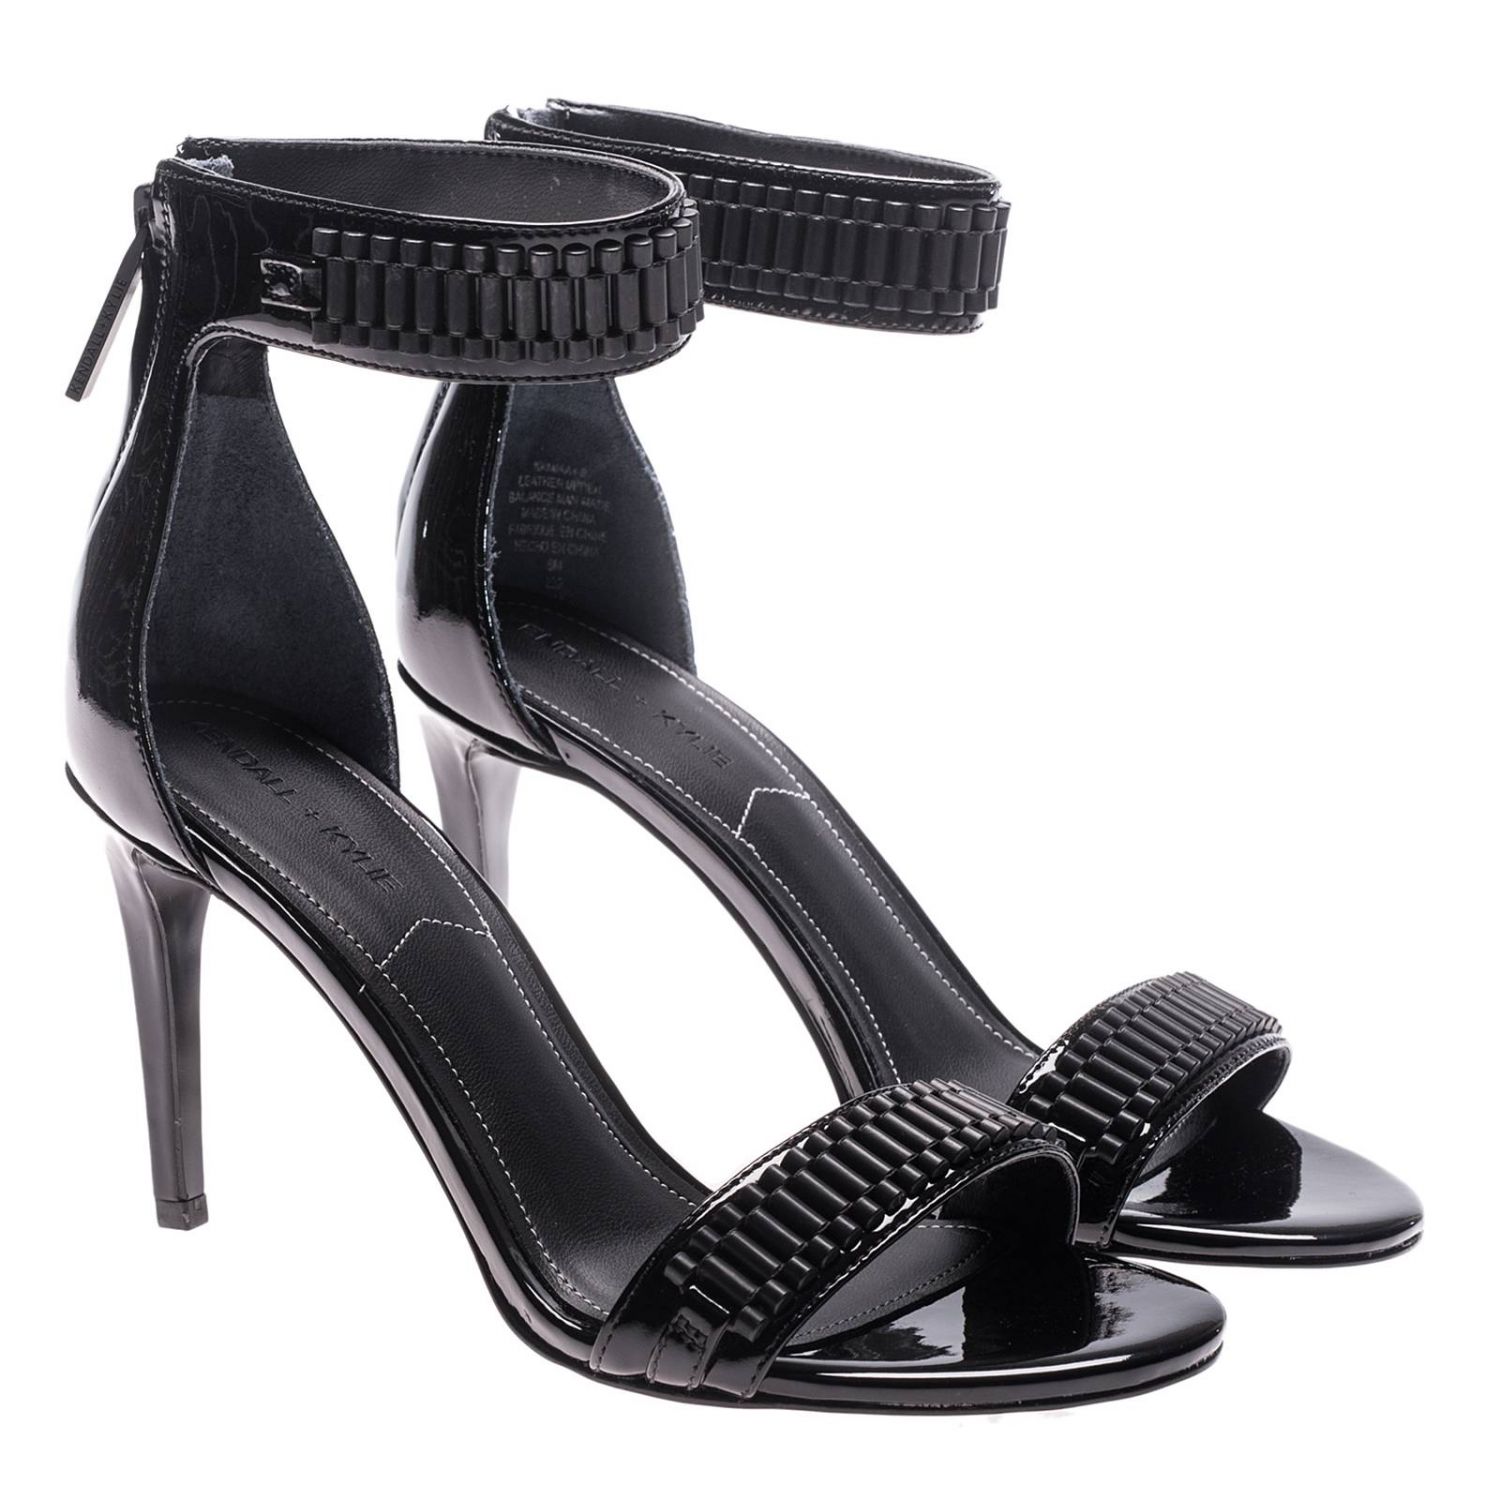 plaintiff Ongoing Artist Kendall + Kylie Outlet: heeled sandals for woman - Black | Kendall + Kylie  heeled sandals kkmiaa4 online on GIGLIO.COM